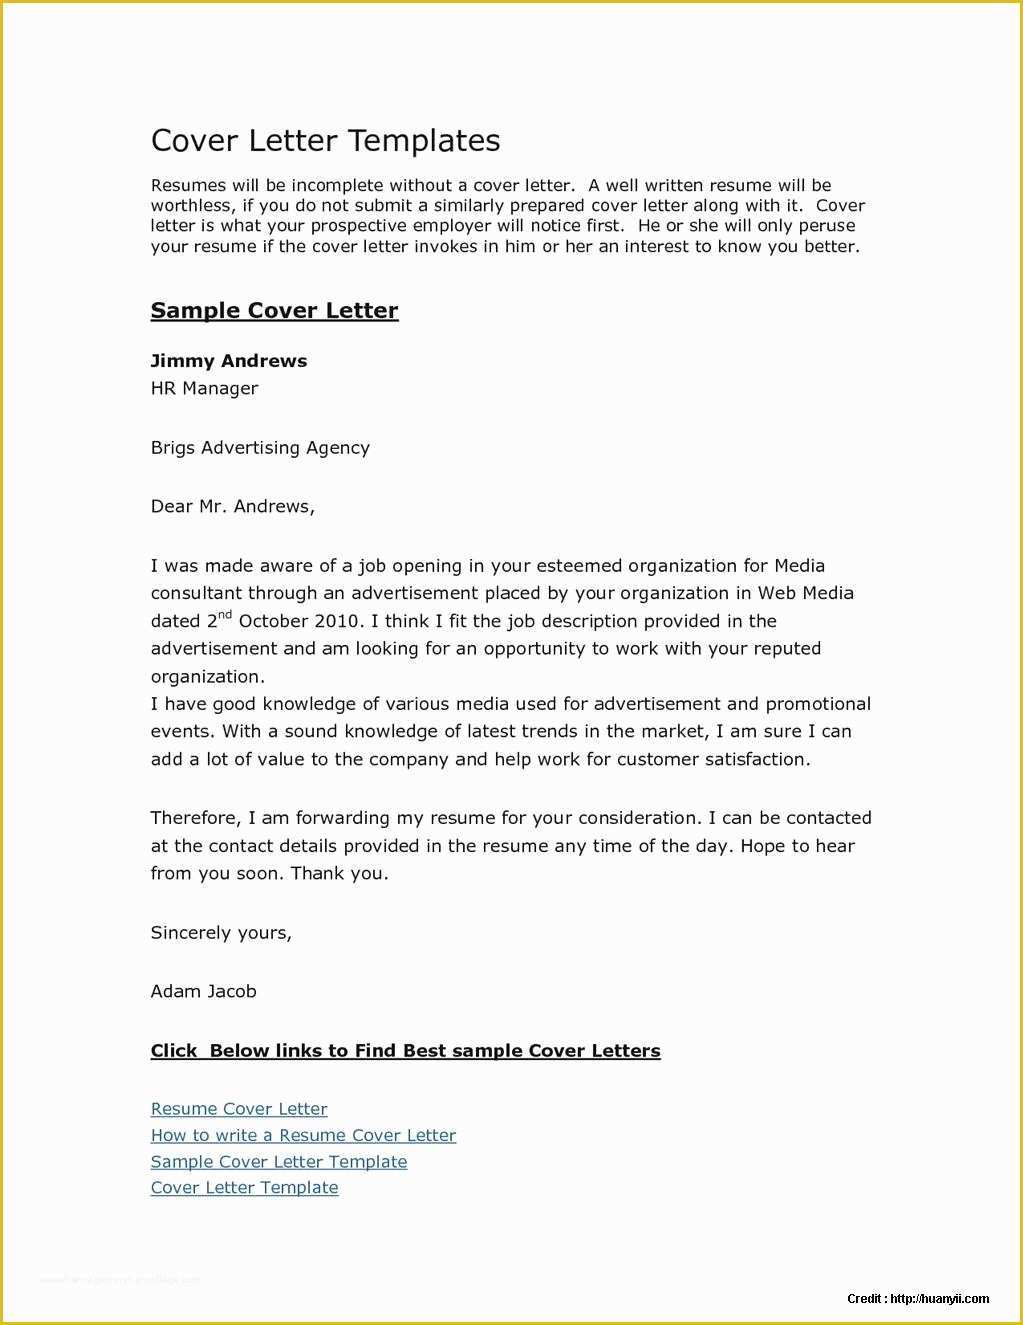 Cover Letter Template Free Download Of Free Cover Letter Templates Microsoft Download Cover